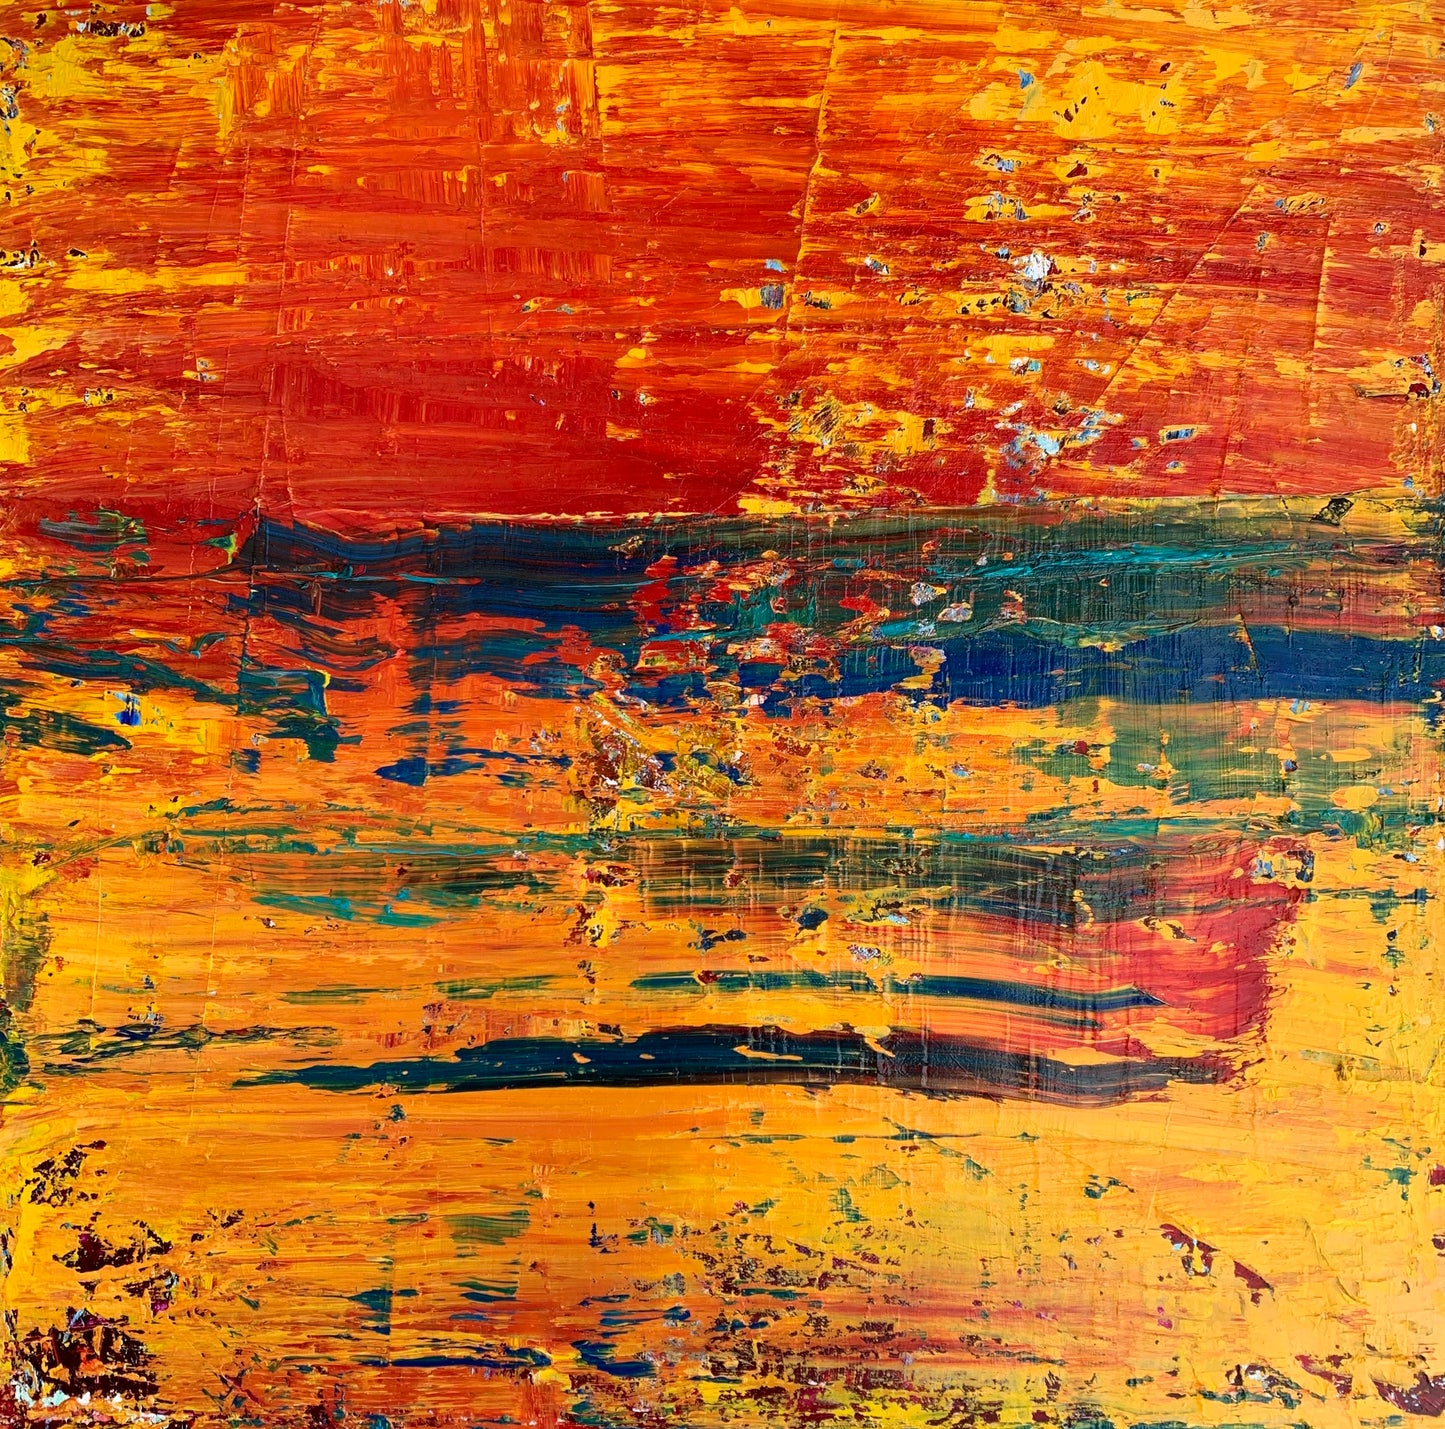 Abstract oil painting using Gerhard Richter techniques and inspired by one of his most famous painting in tones of yellows, reds and oranges.